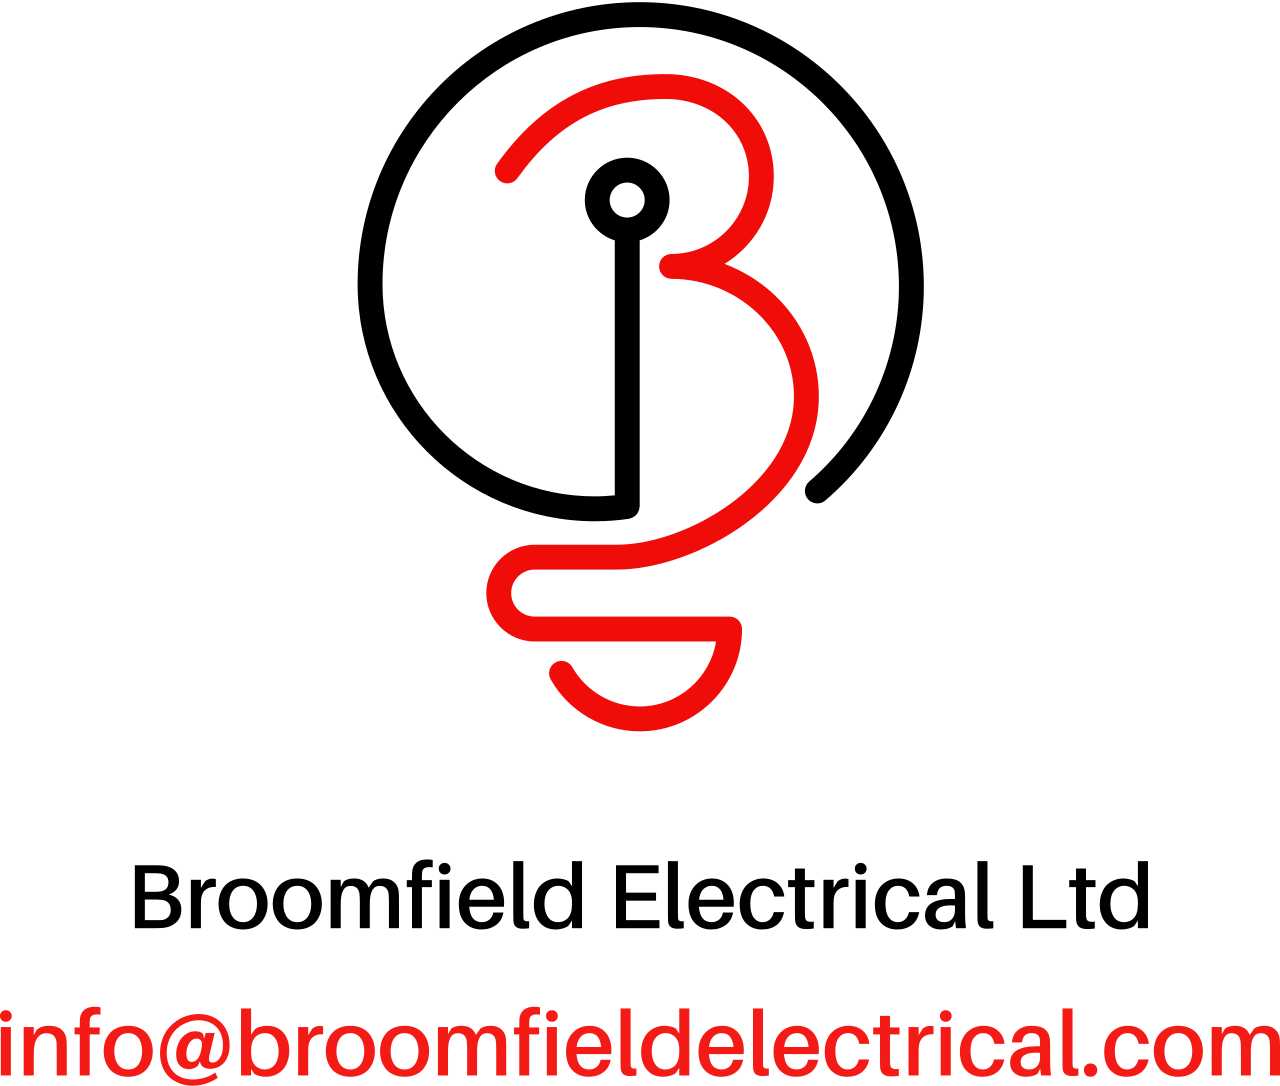 Broomfield Electrical Ltd's web page